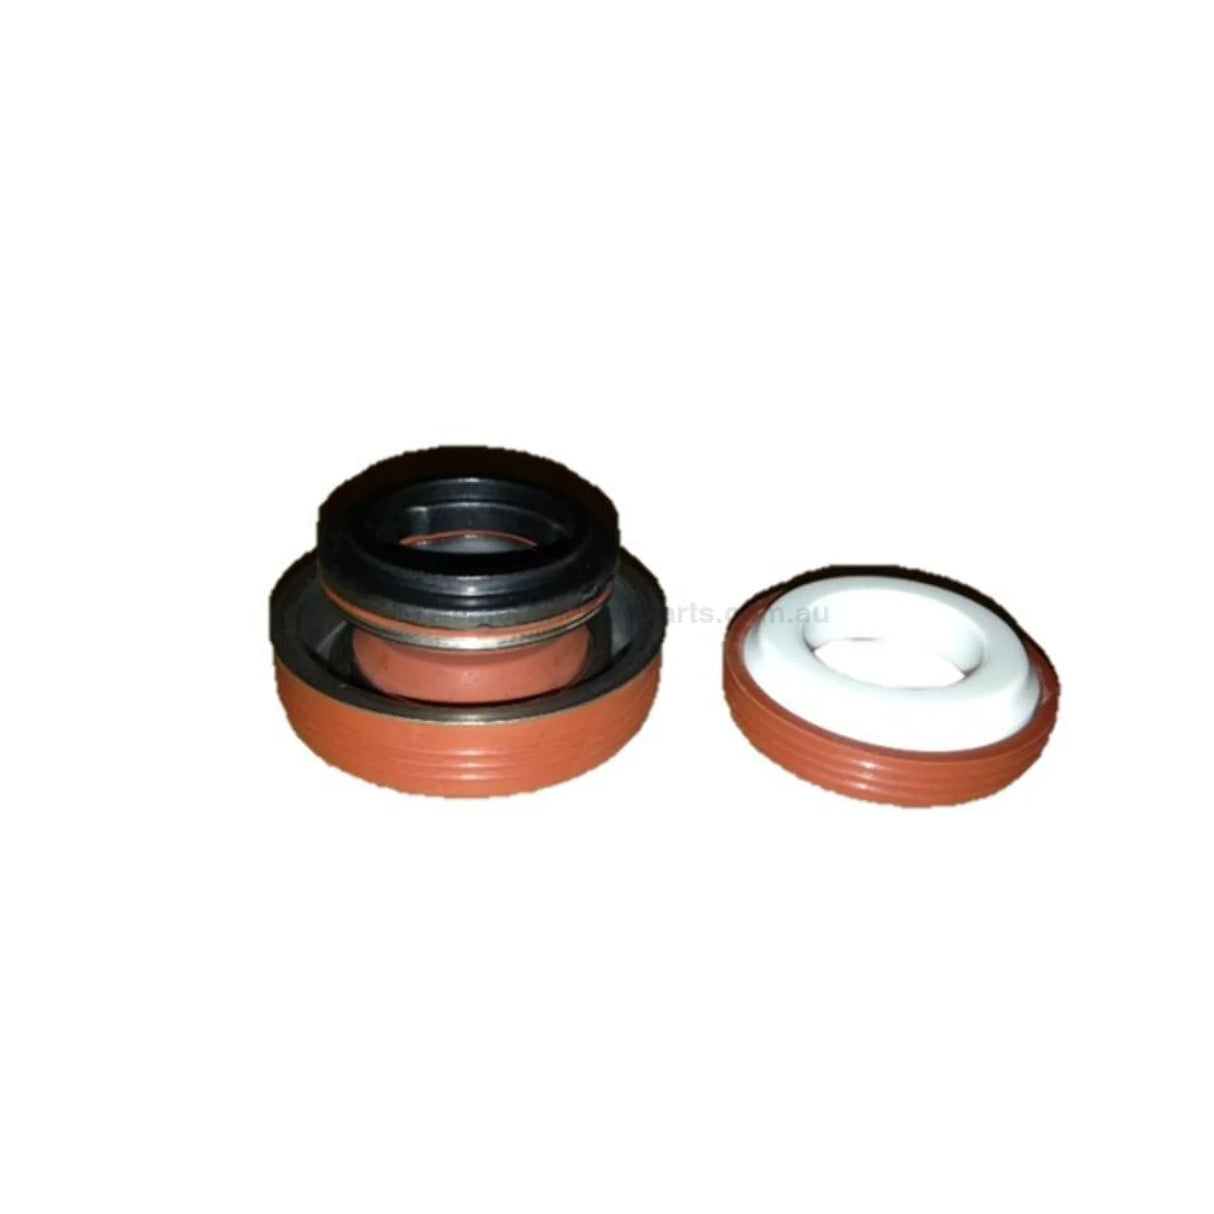 Davey QB / LX Whirlpool / SpaNET Booted Mechanical Seal - Heater and Spa Parts